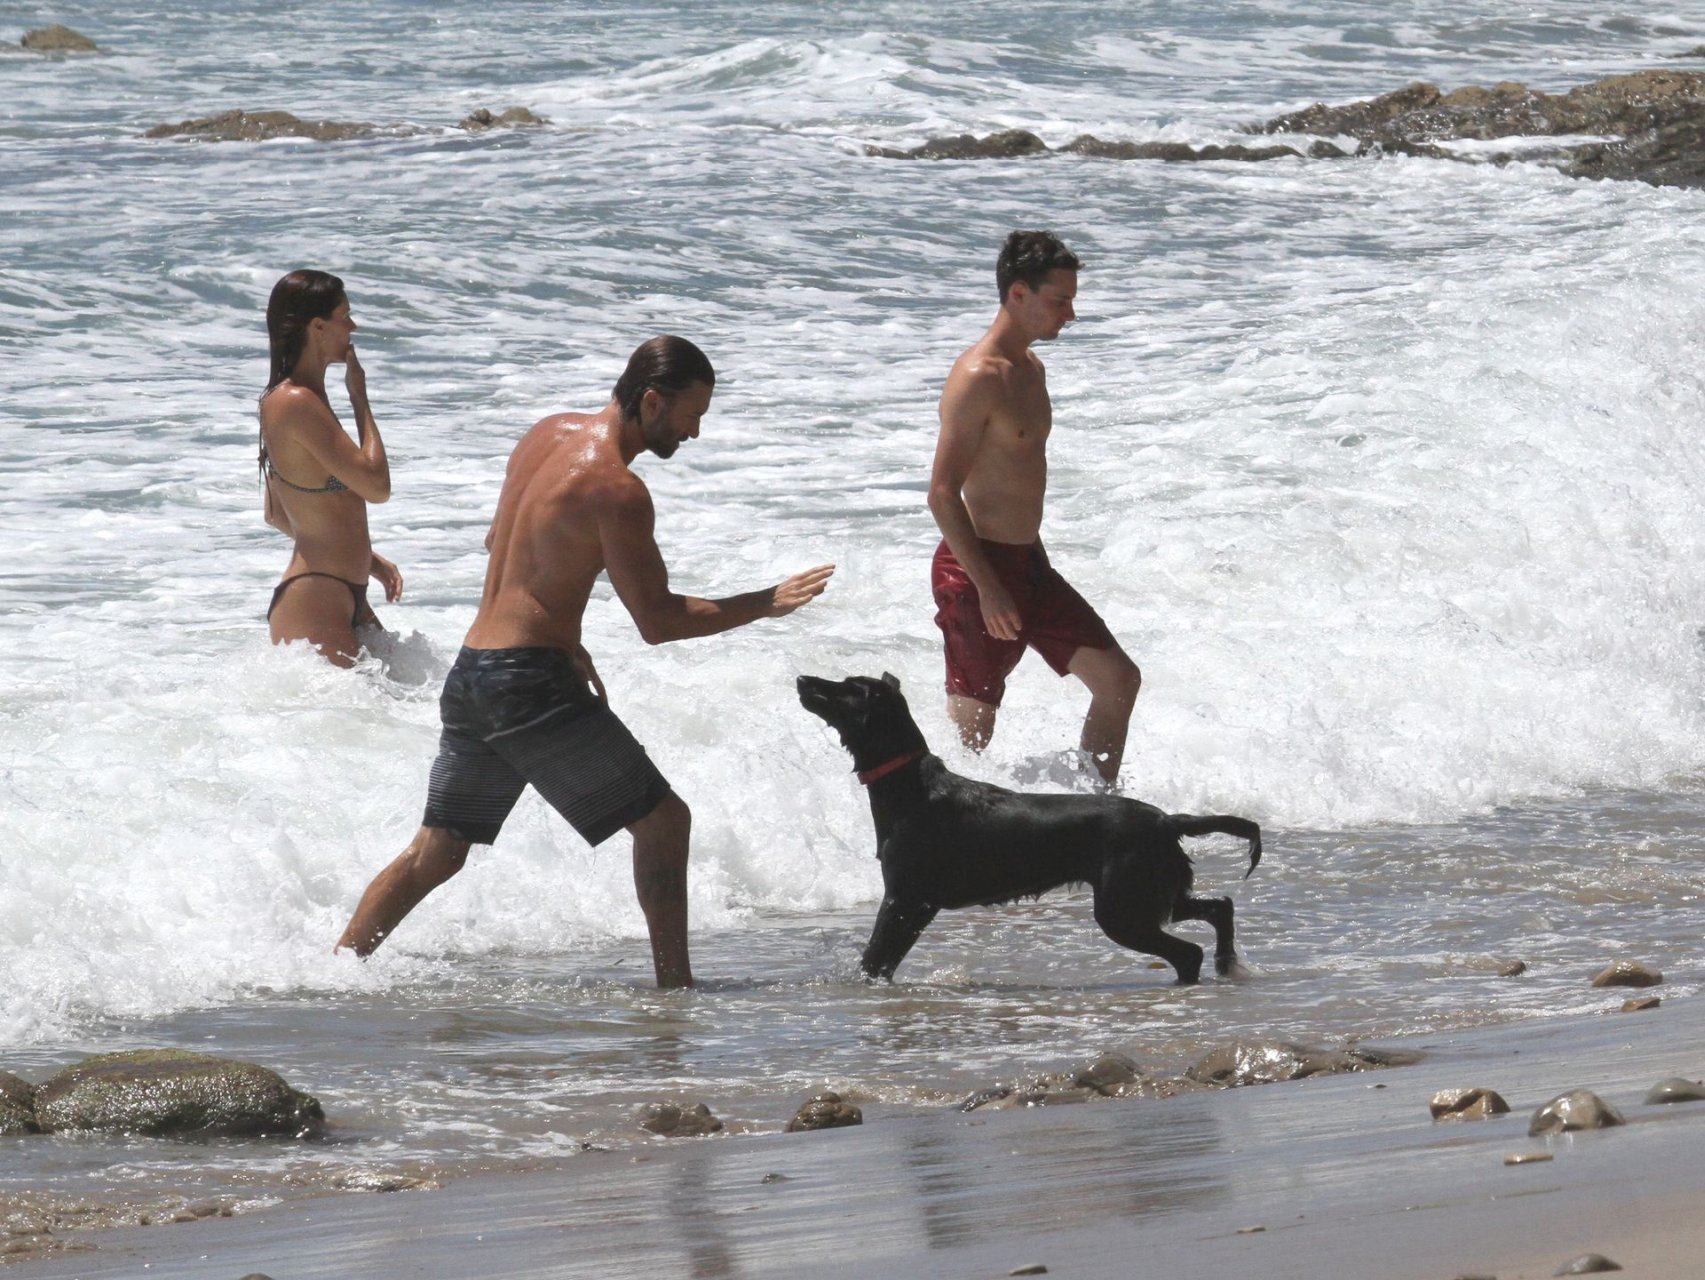 Brandon Jenner shirtless swimming in the ocean with a pregnant girlfriend, Cayley...